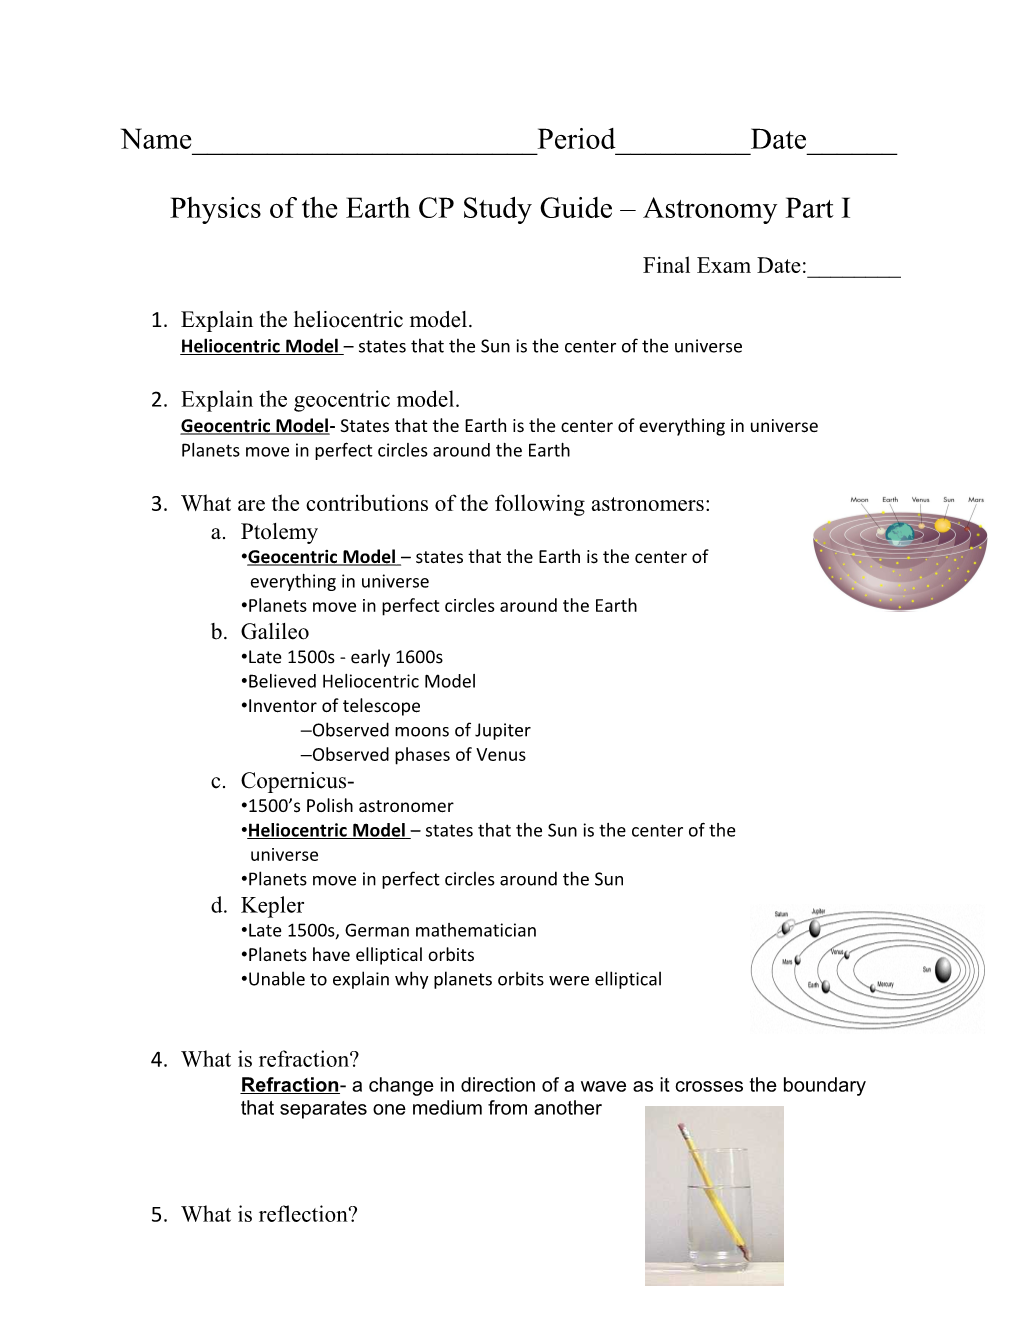 Physics of the Earth CP Study Guide Astronomy Part I